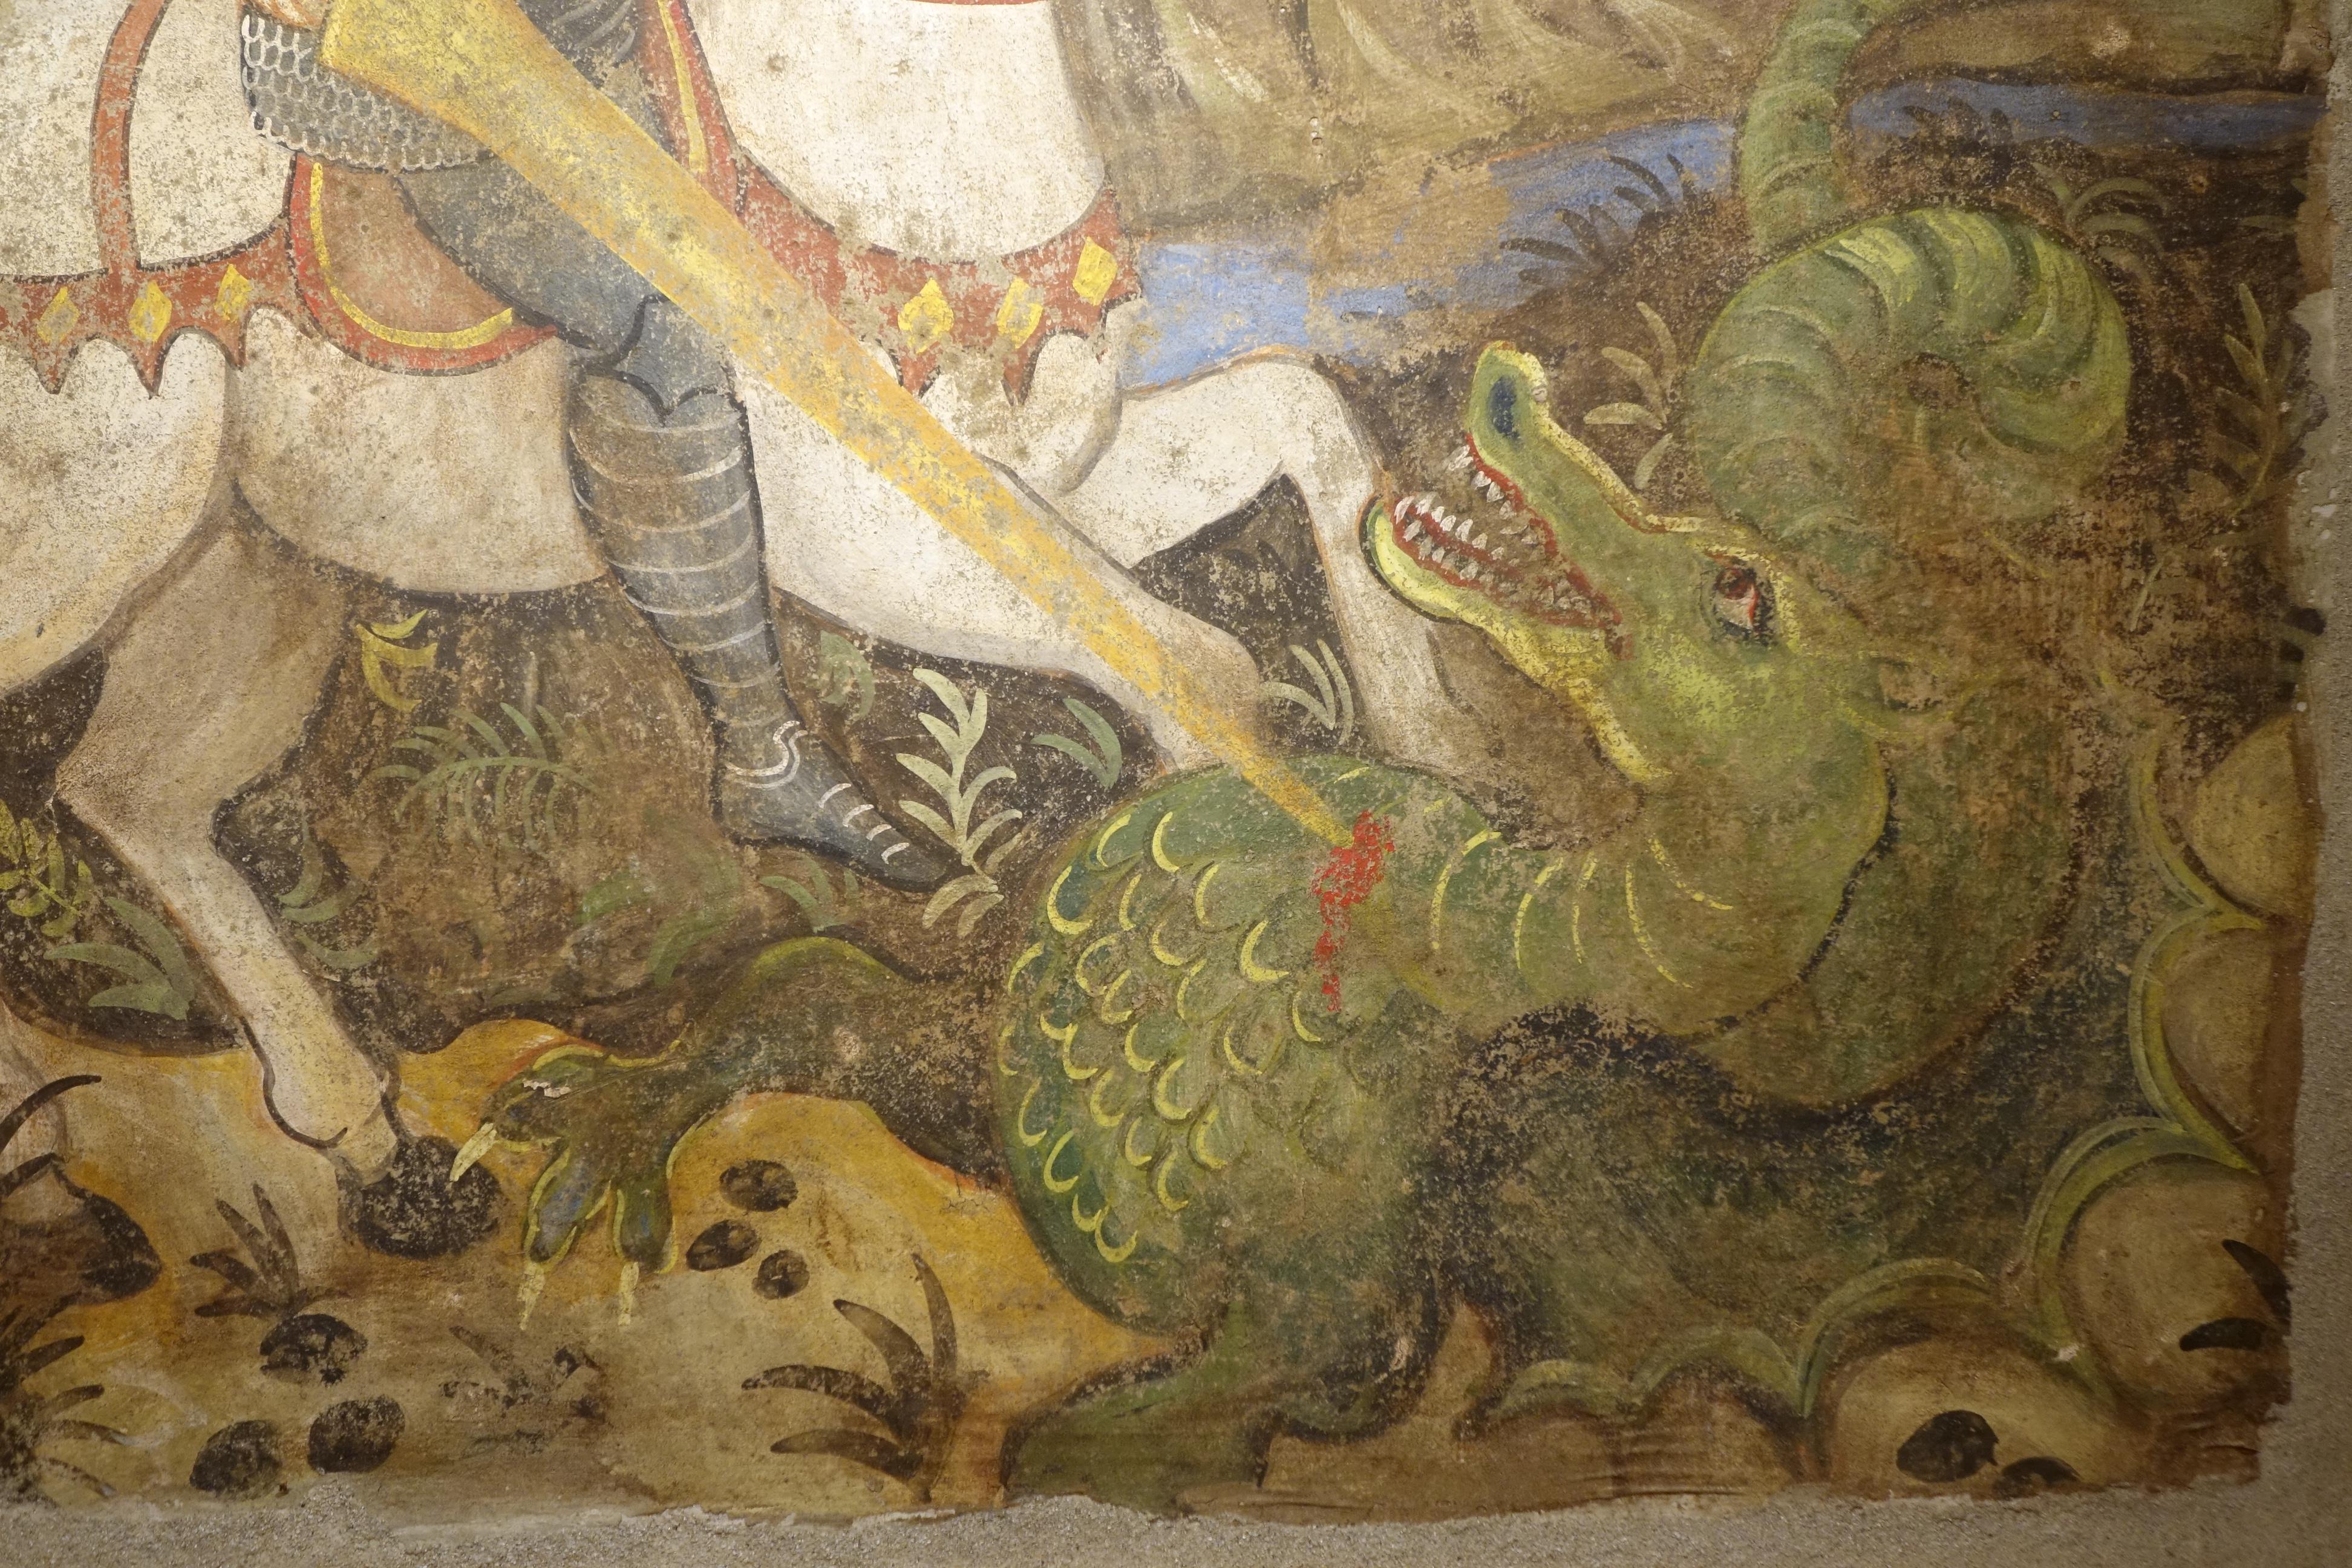 Rare fresco depicting St. George slaying the dragon under the walls of Silenus, in the Roman province of Libya.
St. George of Lydda, born in 280 in Mazaca, Cappadocia, and canonized in 494, is a holy saroctone, known for having slain the dragon